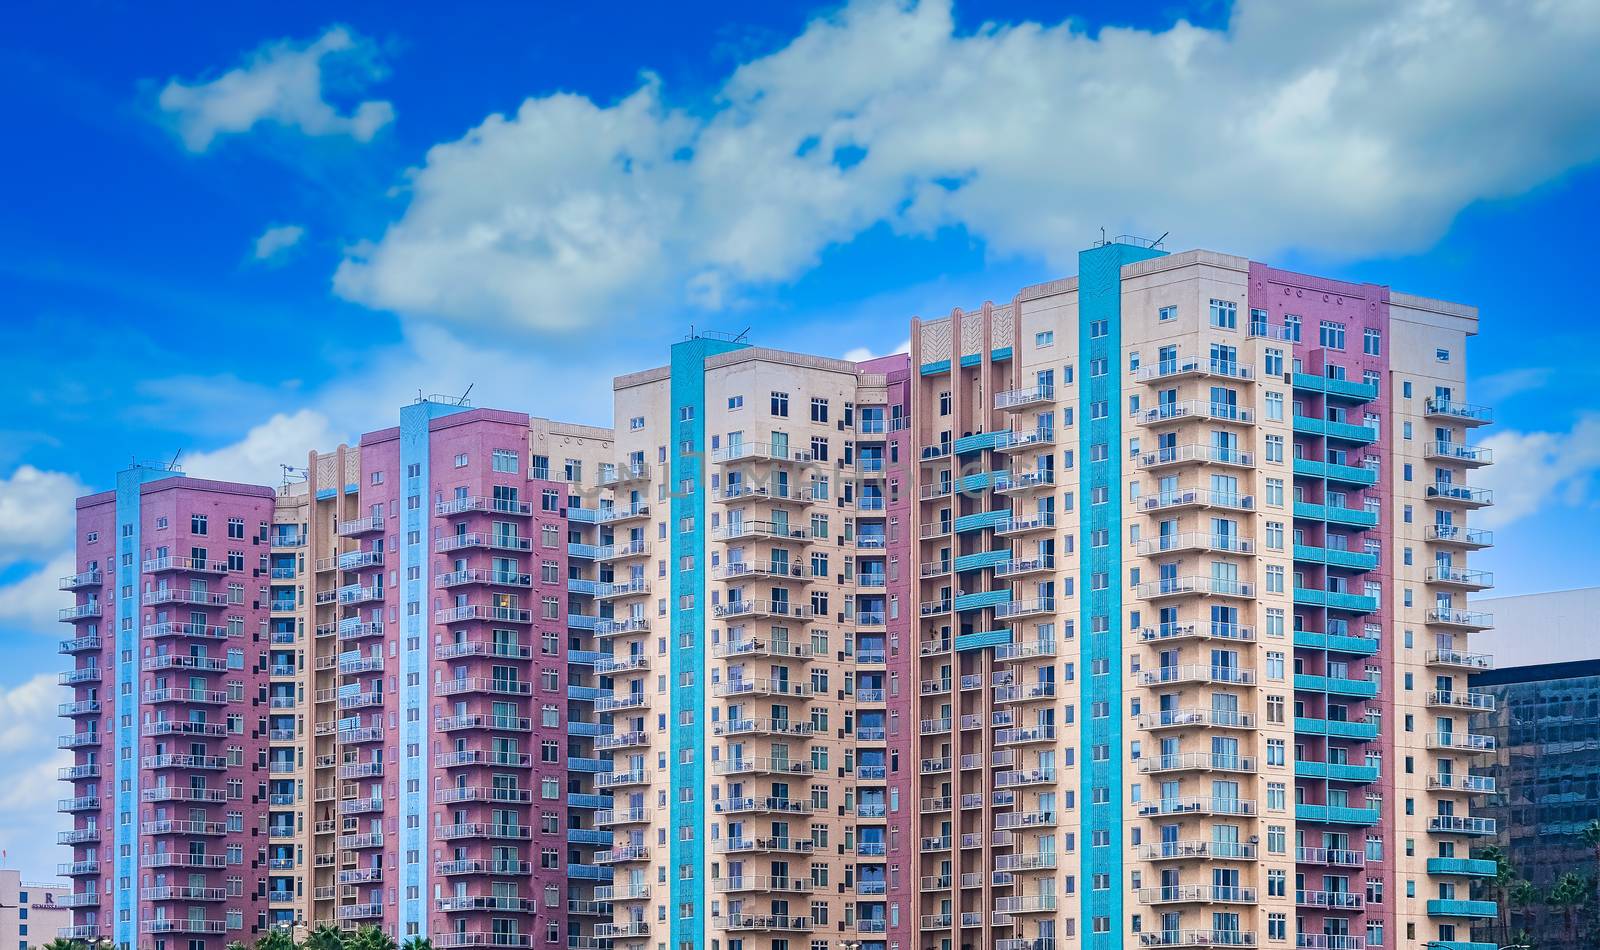 Tropical Condo Towers in Pastel Colors